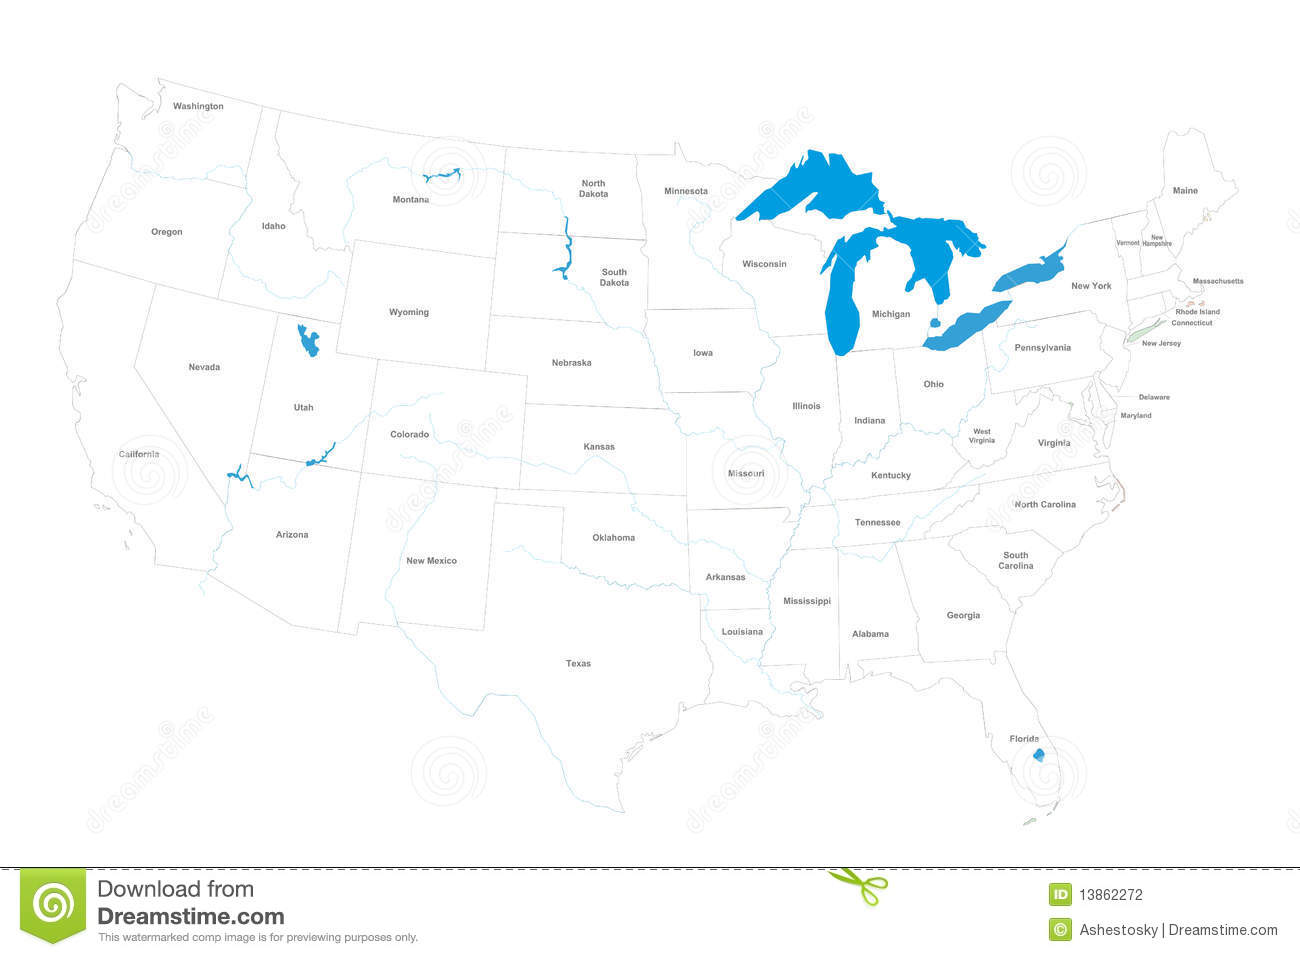 Outline Map of USA with State Names